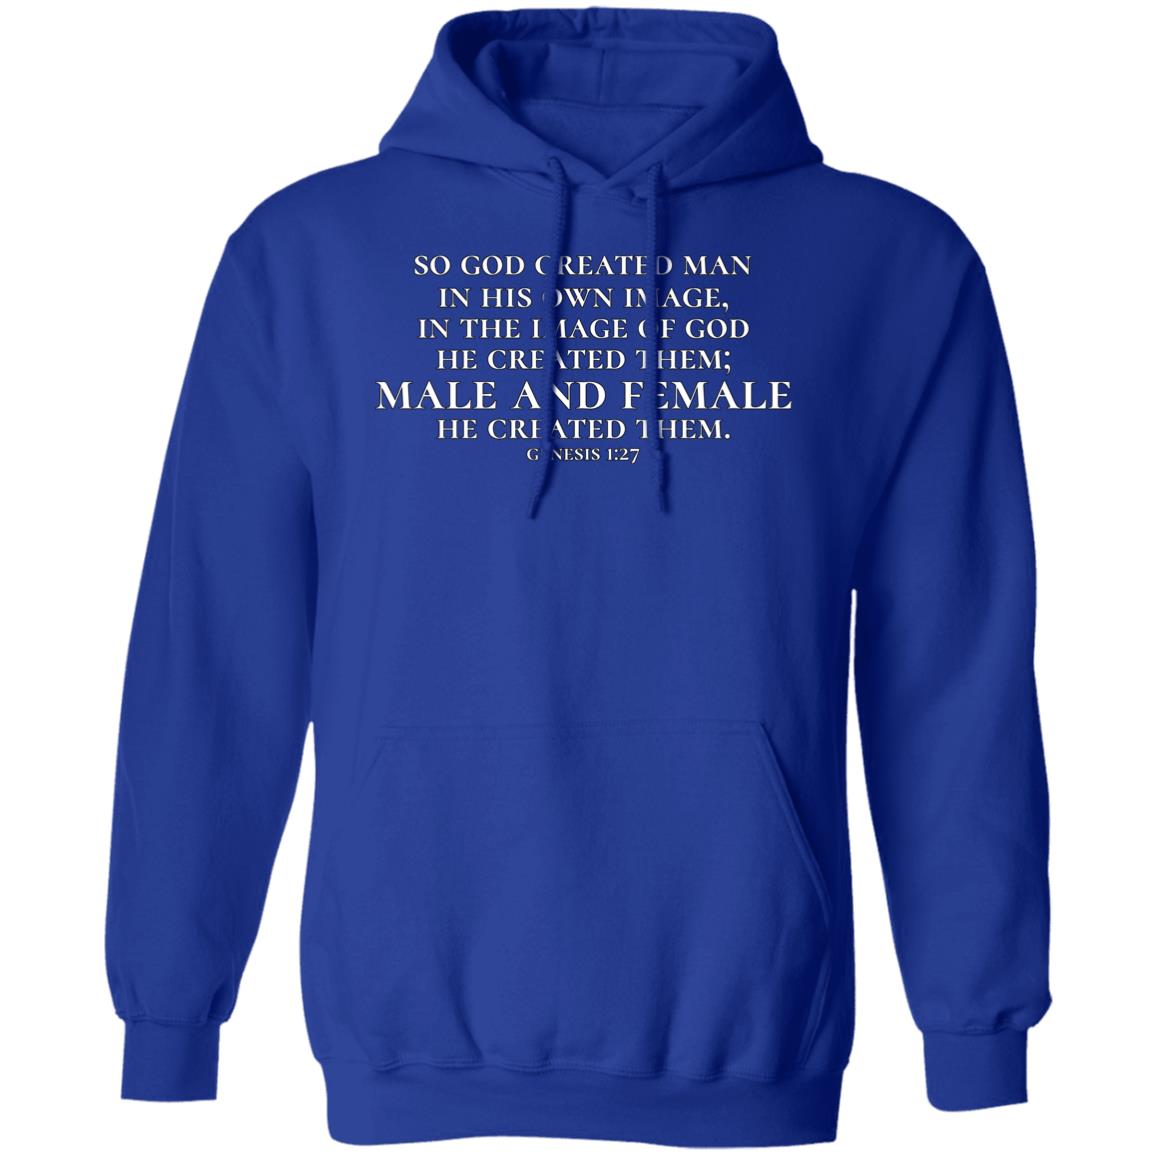 Why We Protect Our Children (Unisex Hoodie)